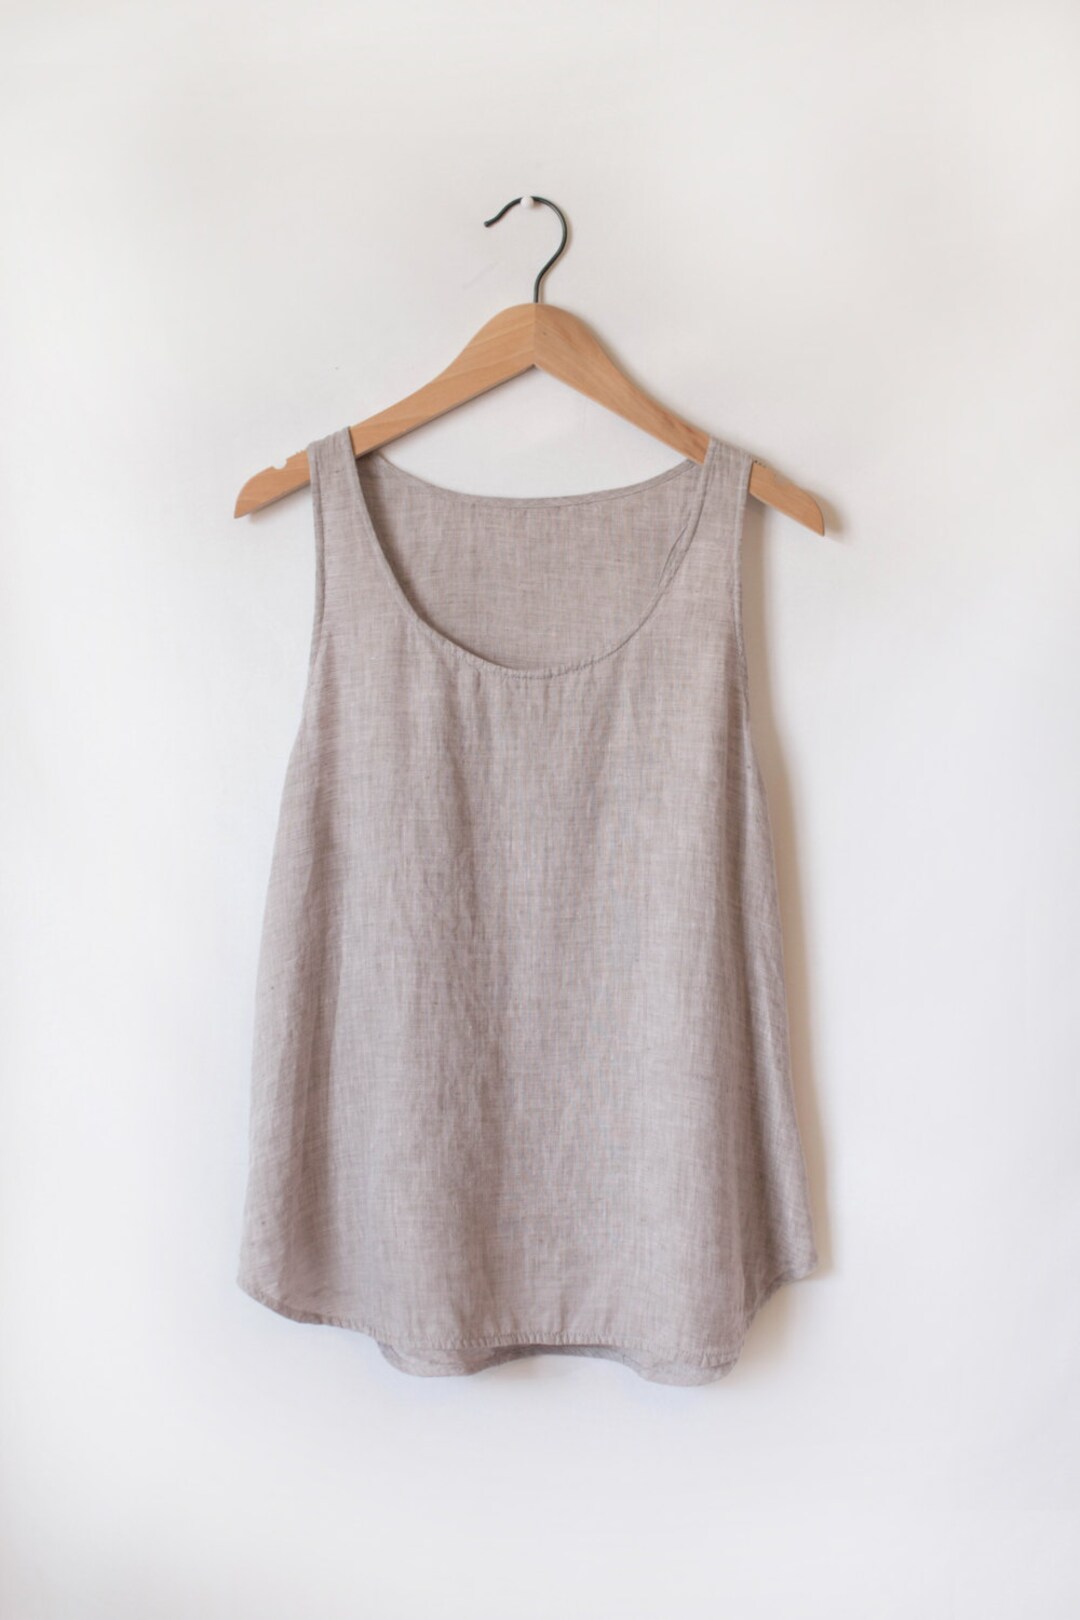 Linen Sleep Tank in Cool Grey made in USA - Etsy